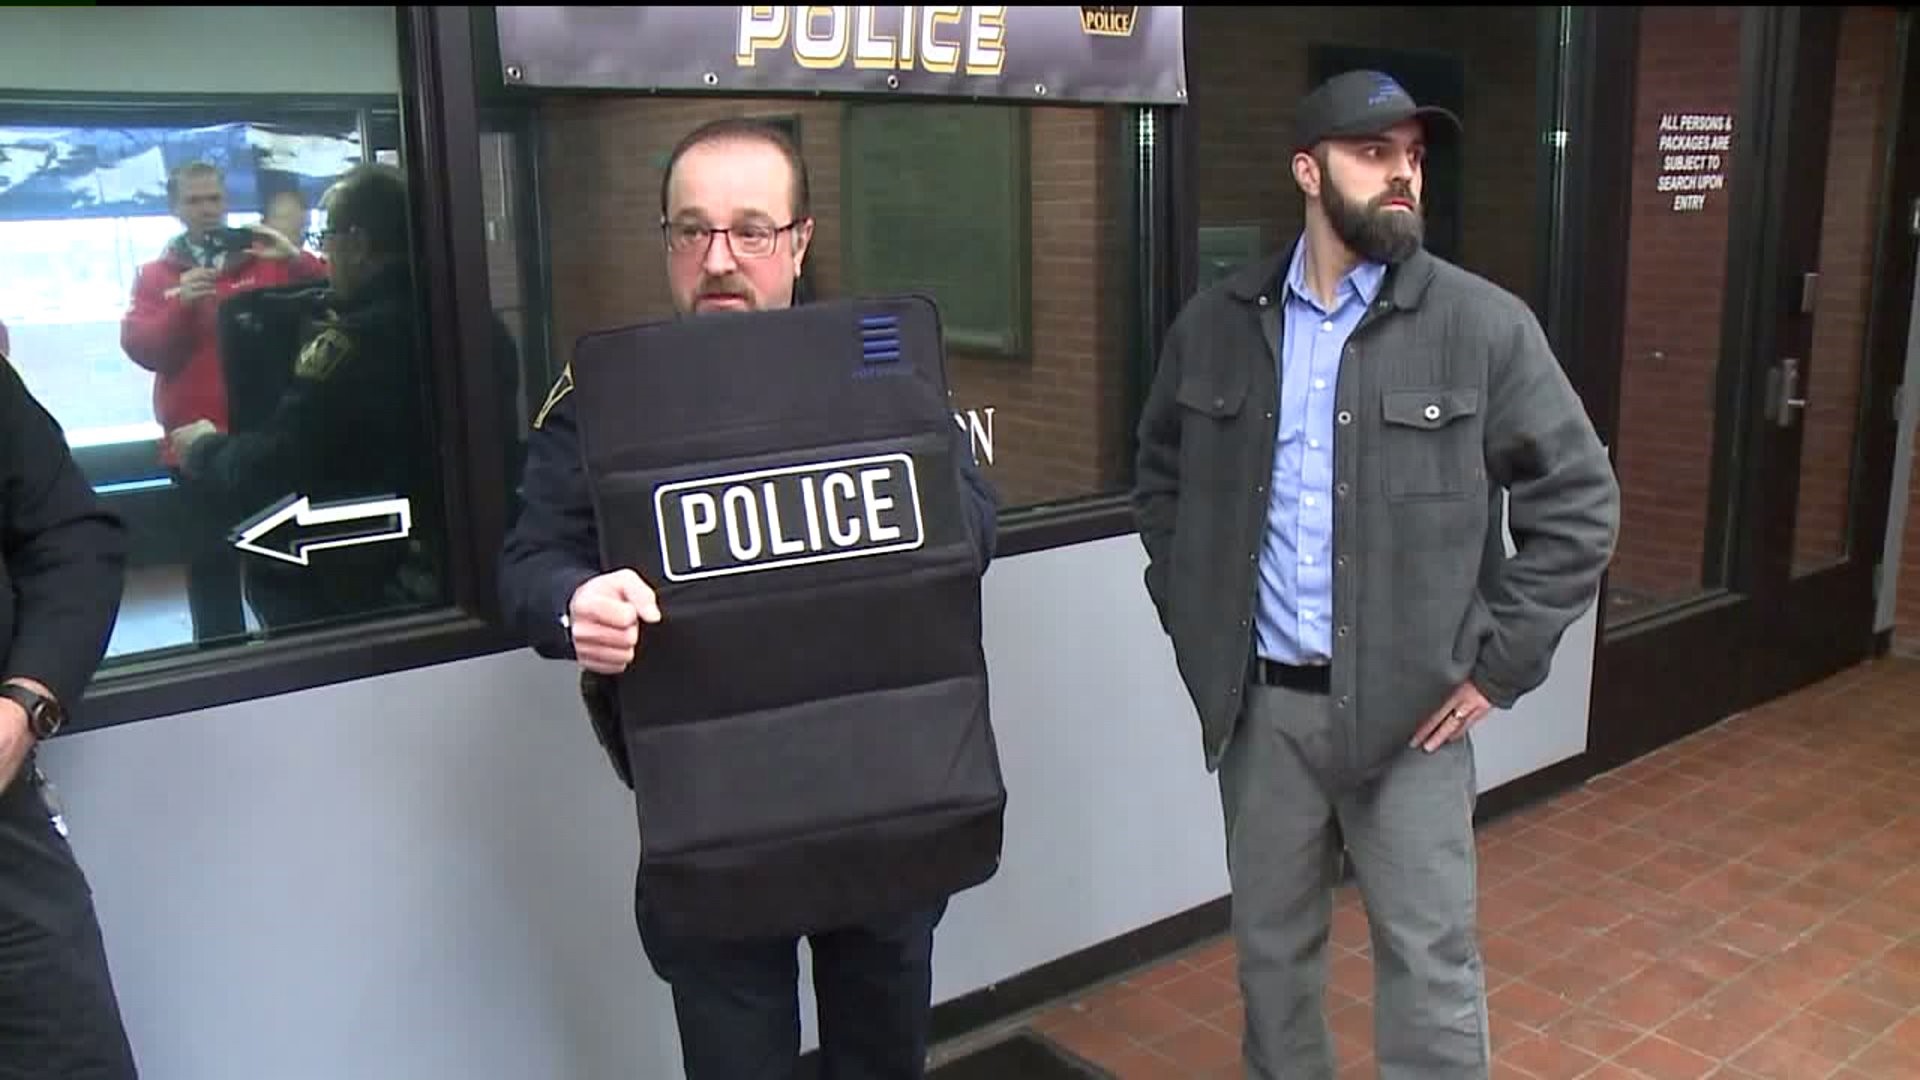 New Shields for Wilkes-Barre Police